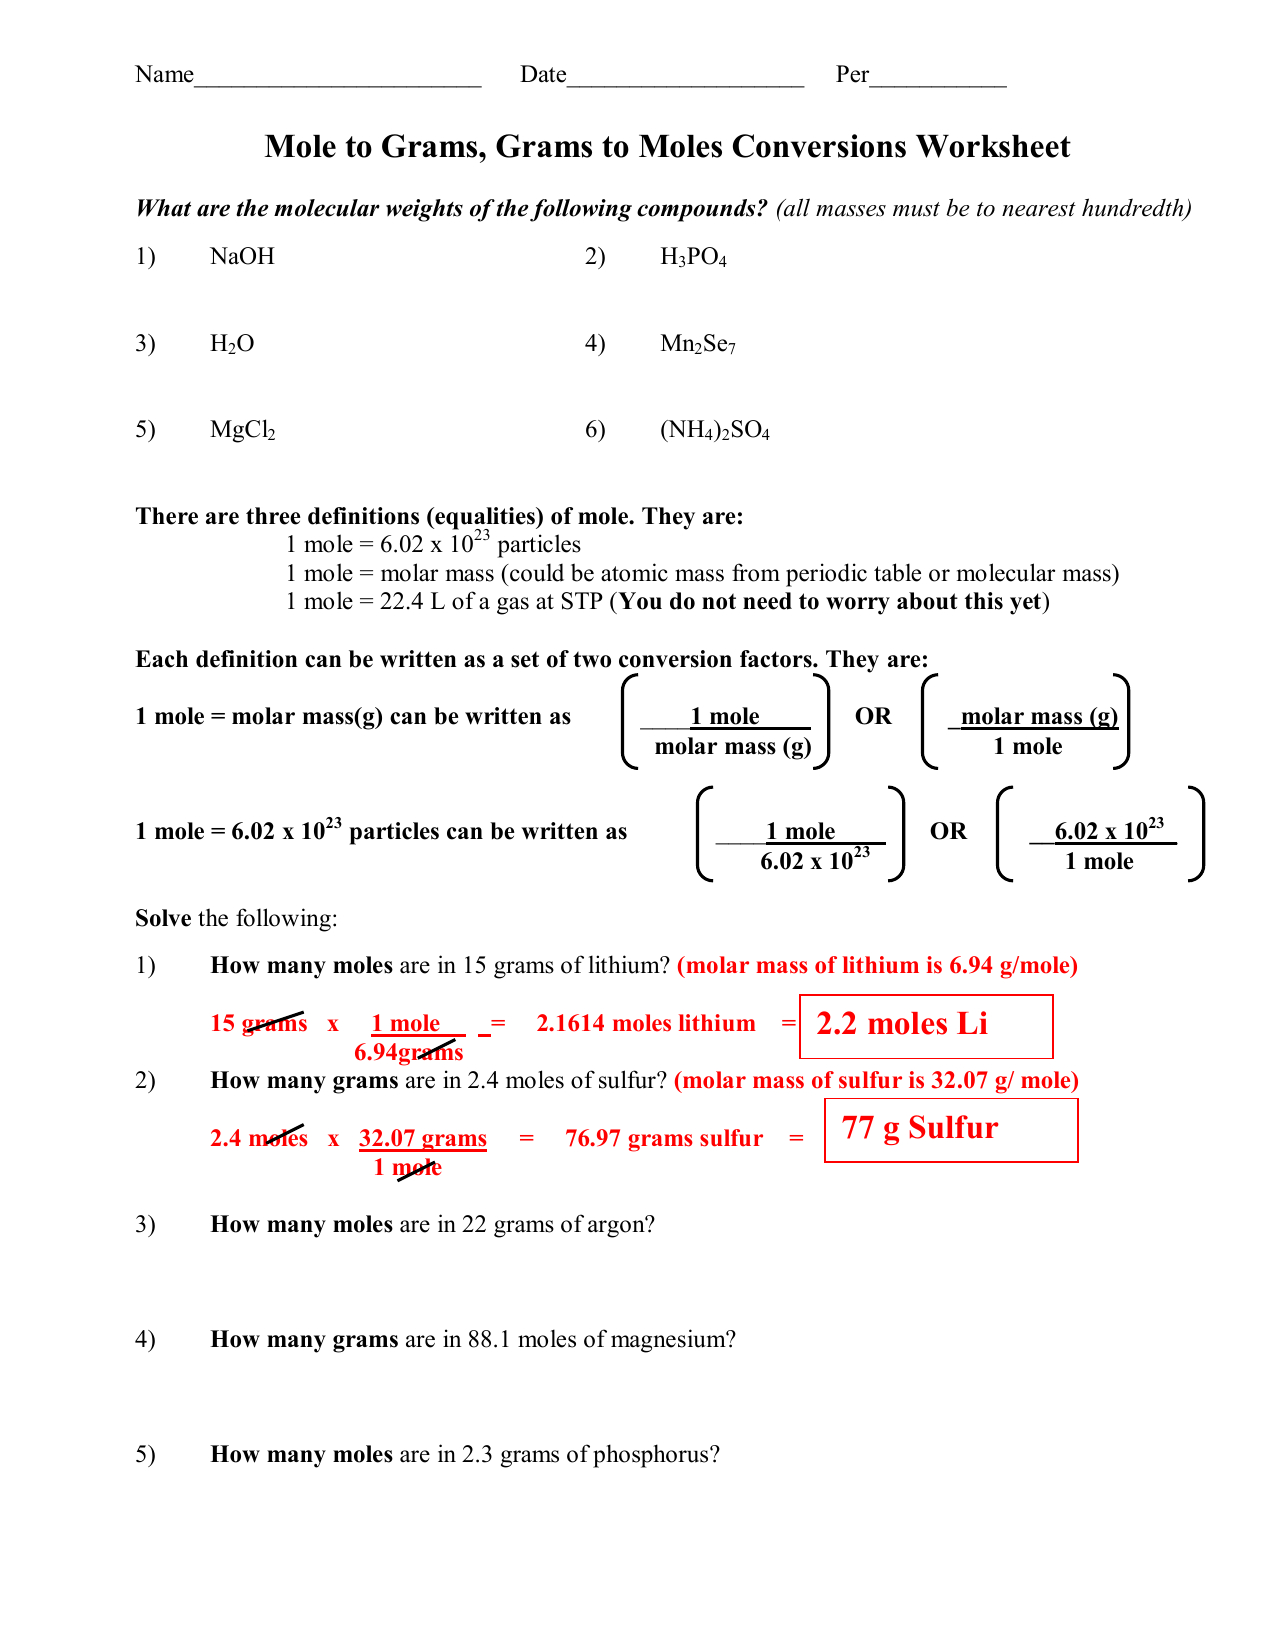 Molestogrmasandgramstomolesconversionswswithans Together With Mole To Grams Grams To Moles Conversions Worksheet Answer Key